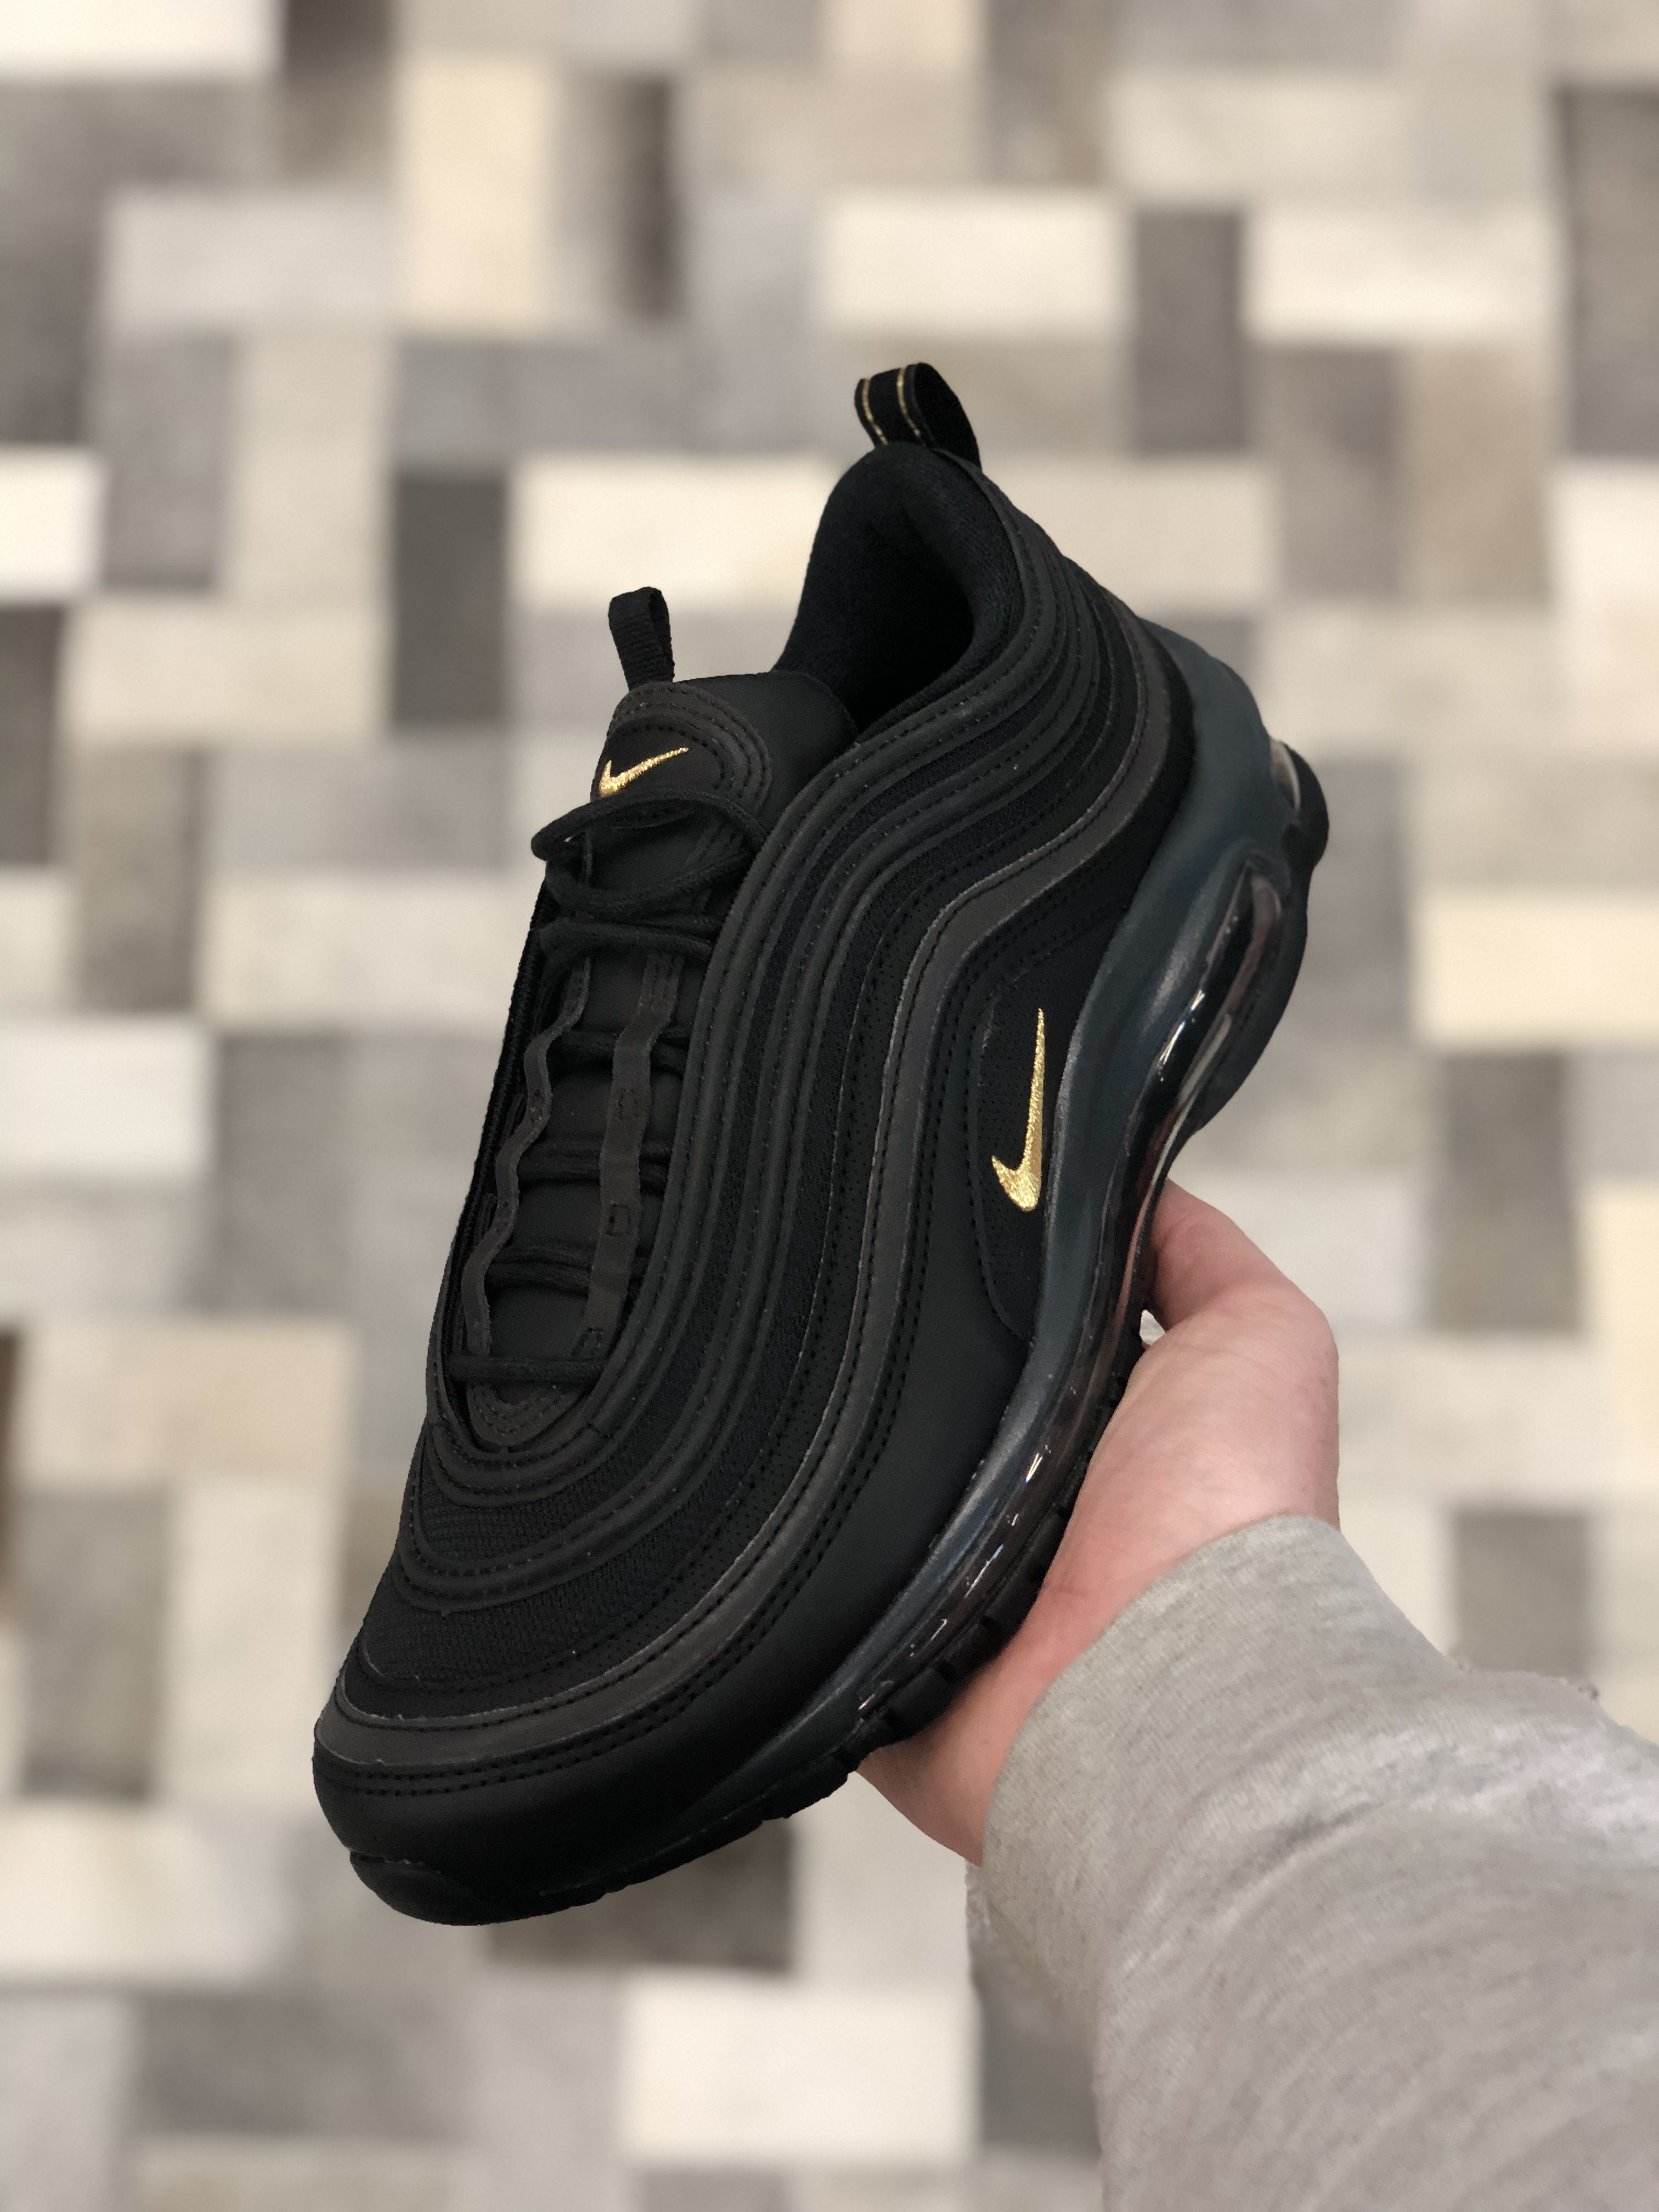 ensalada Descuido Doblez The Sole Supplier on Twitter: "You need the Foot Locker-exclusive Nike  'Black Gold' pack in your collection right now! Air Max 97 &gt;  https://t.co/rBv8IELm7A Vapormax Plus &gt; https://t.co/FRuvzmsWB6 Tuned 1  &gt; https://t.co/PzlOy091DH